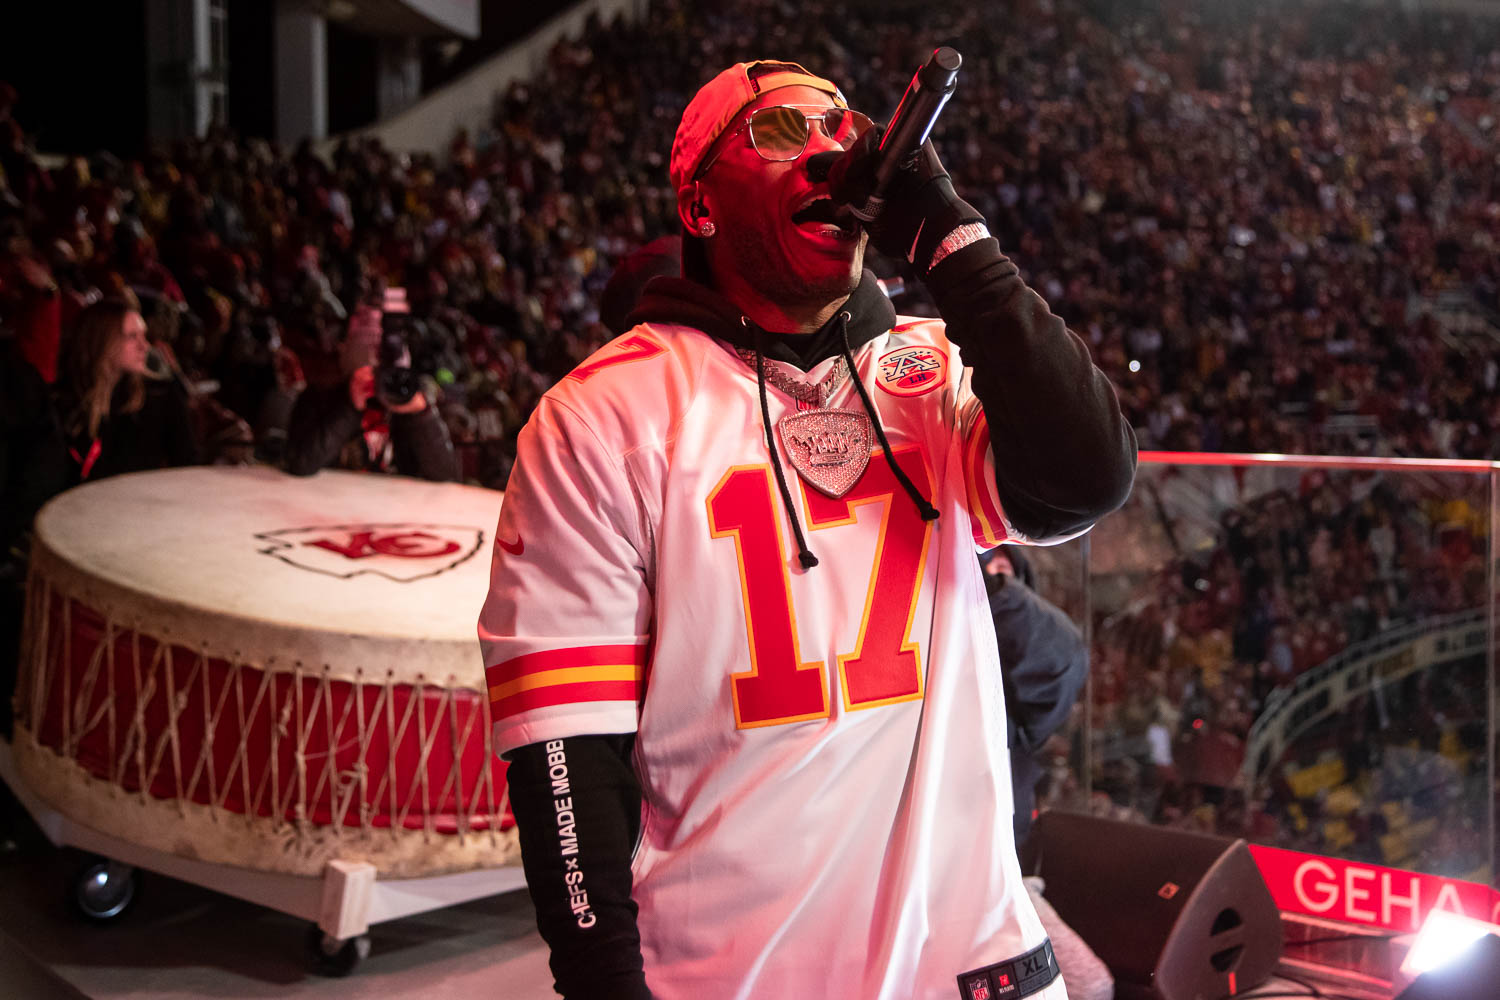 Nelly performing at halftime during the divisional playoff football game between the Kansas City Chiefs and the Buffalo Bills, Sunday, January 23, 2022 in Kansas City.